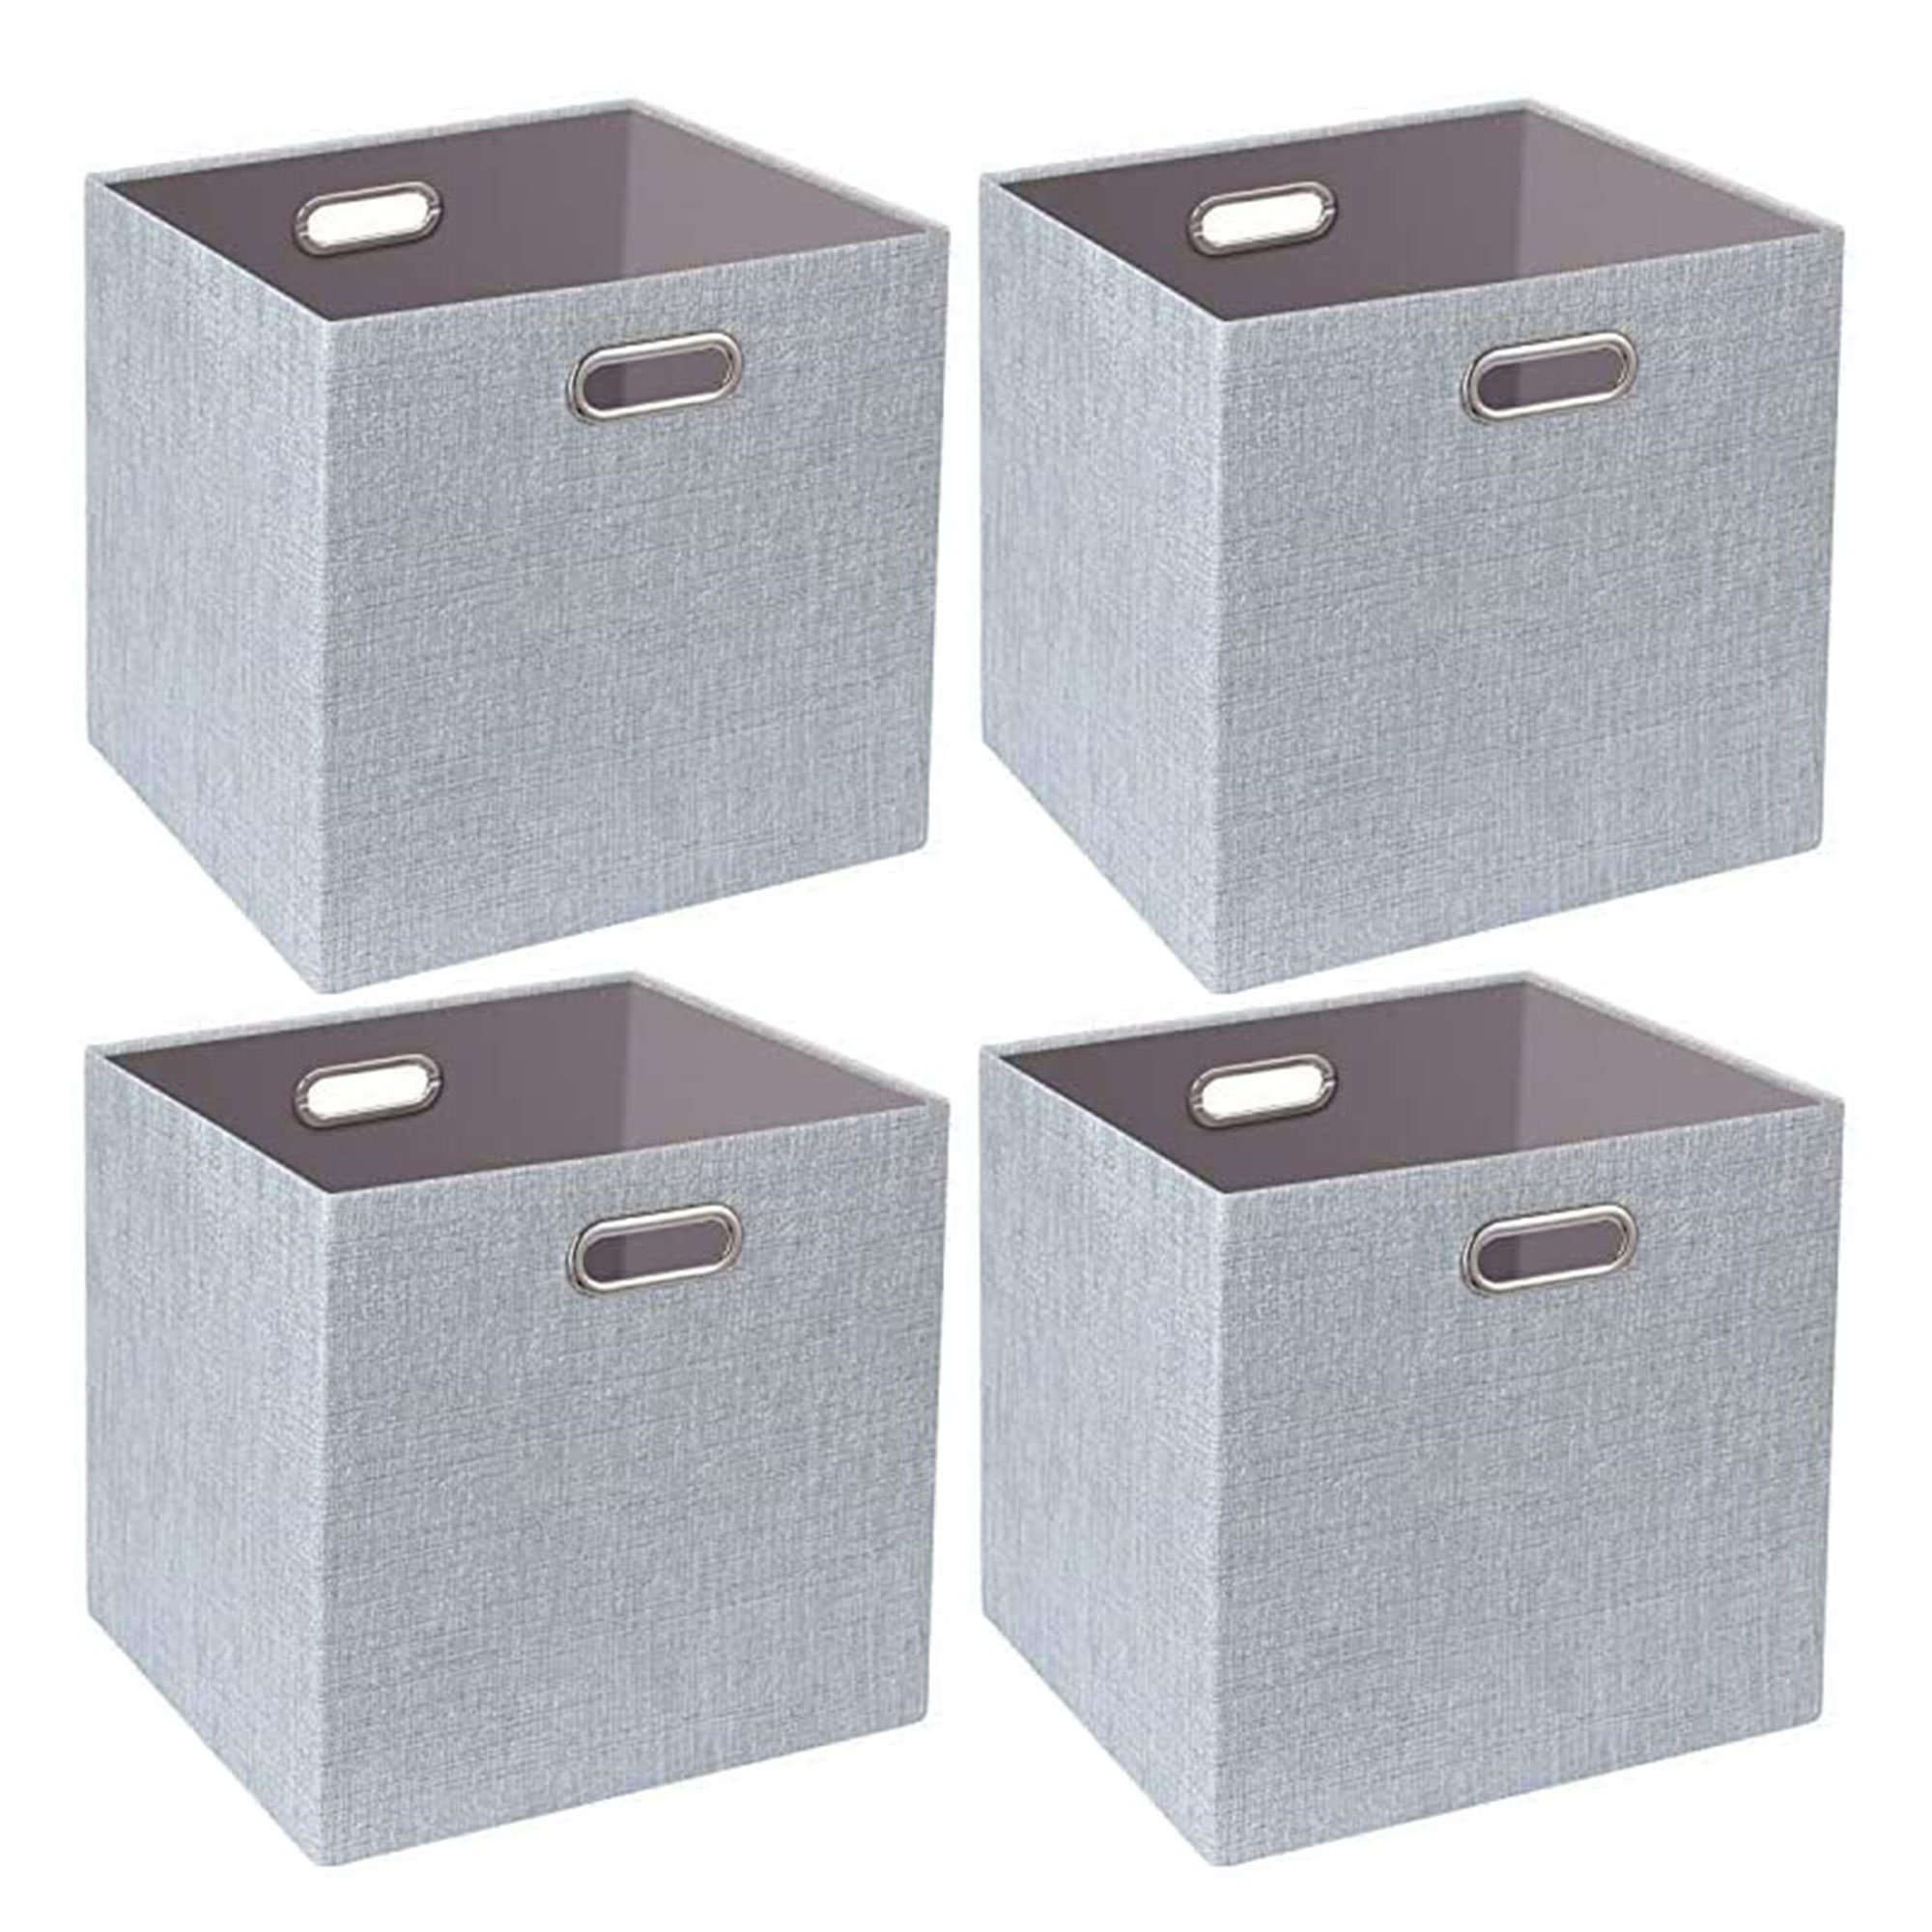 Latitude Run® Thicker Collapsible Storage Fabric Cube Set & Reviews